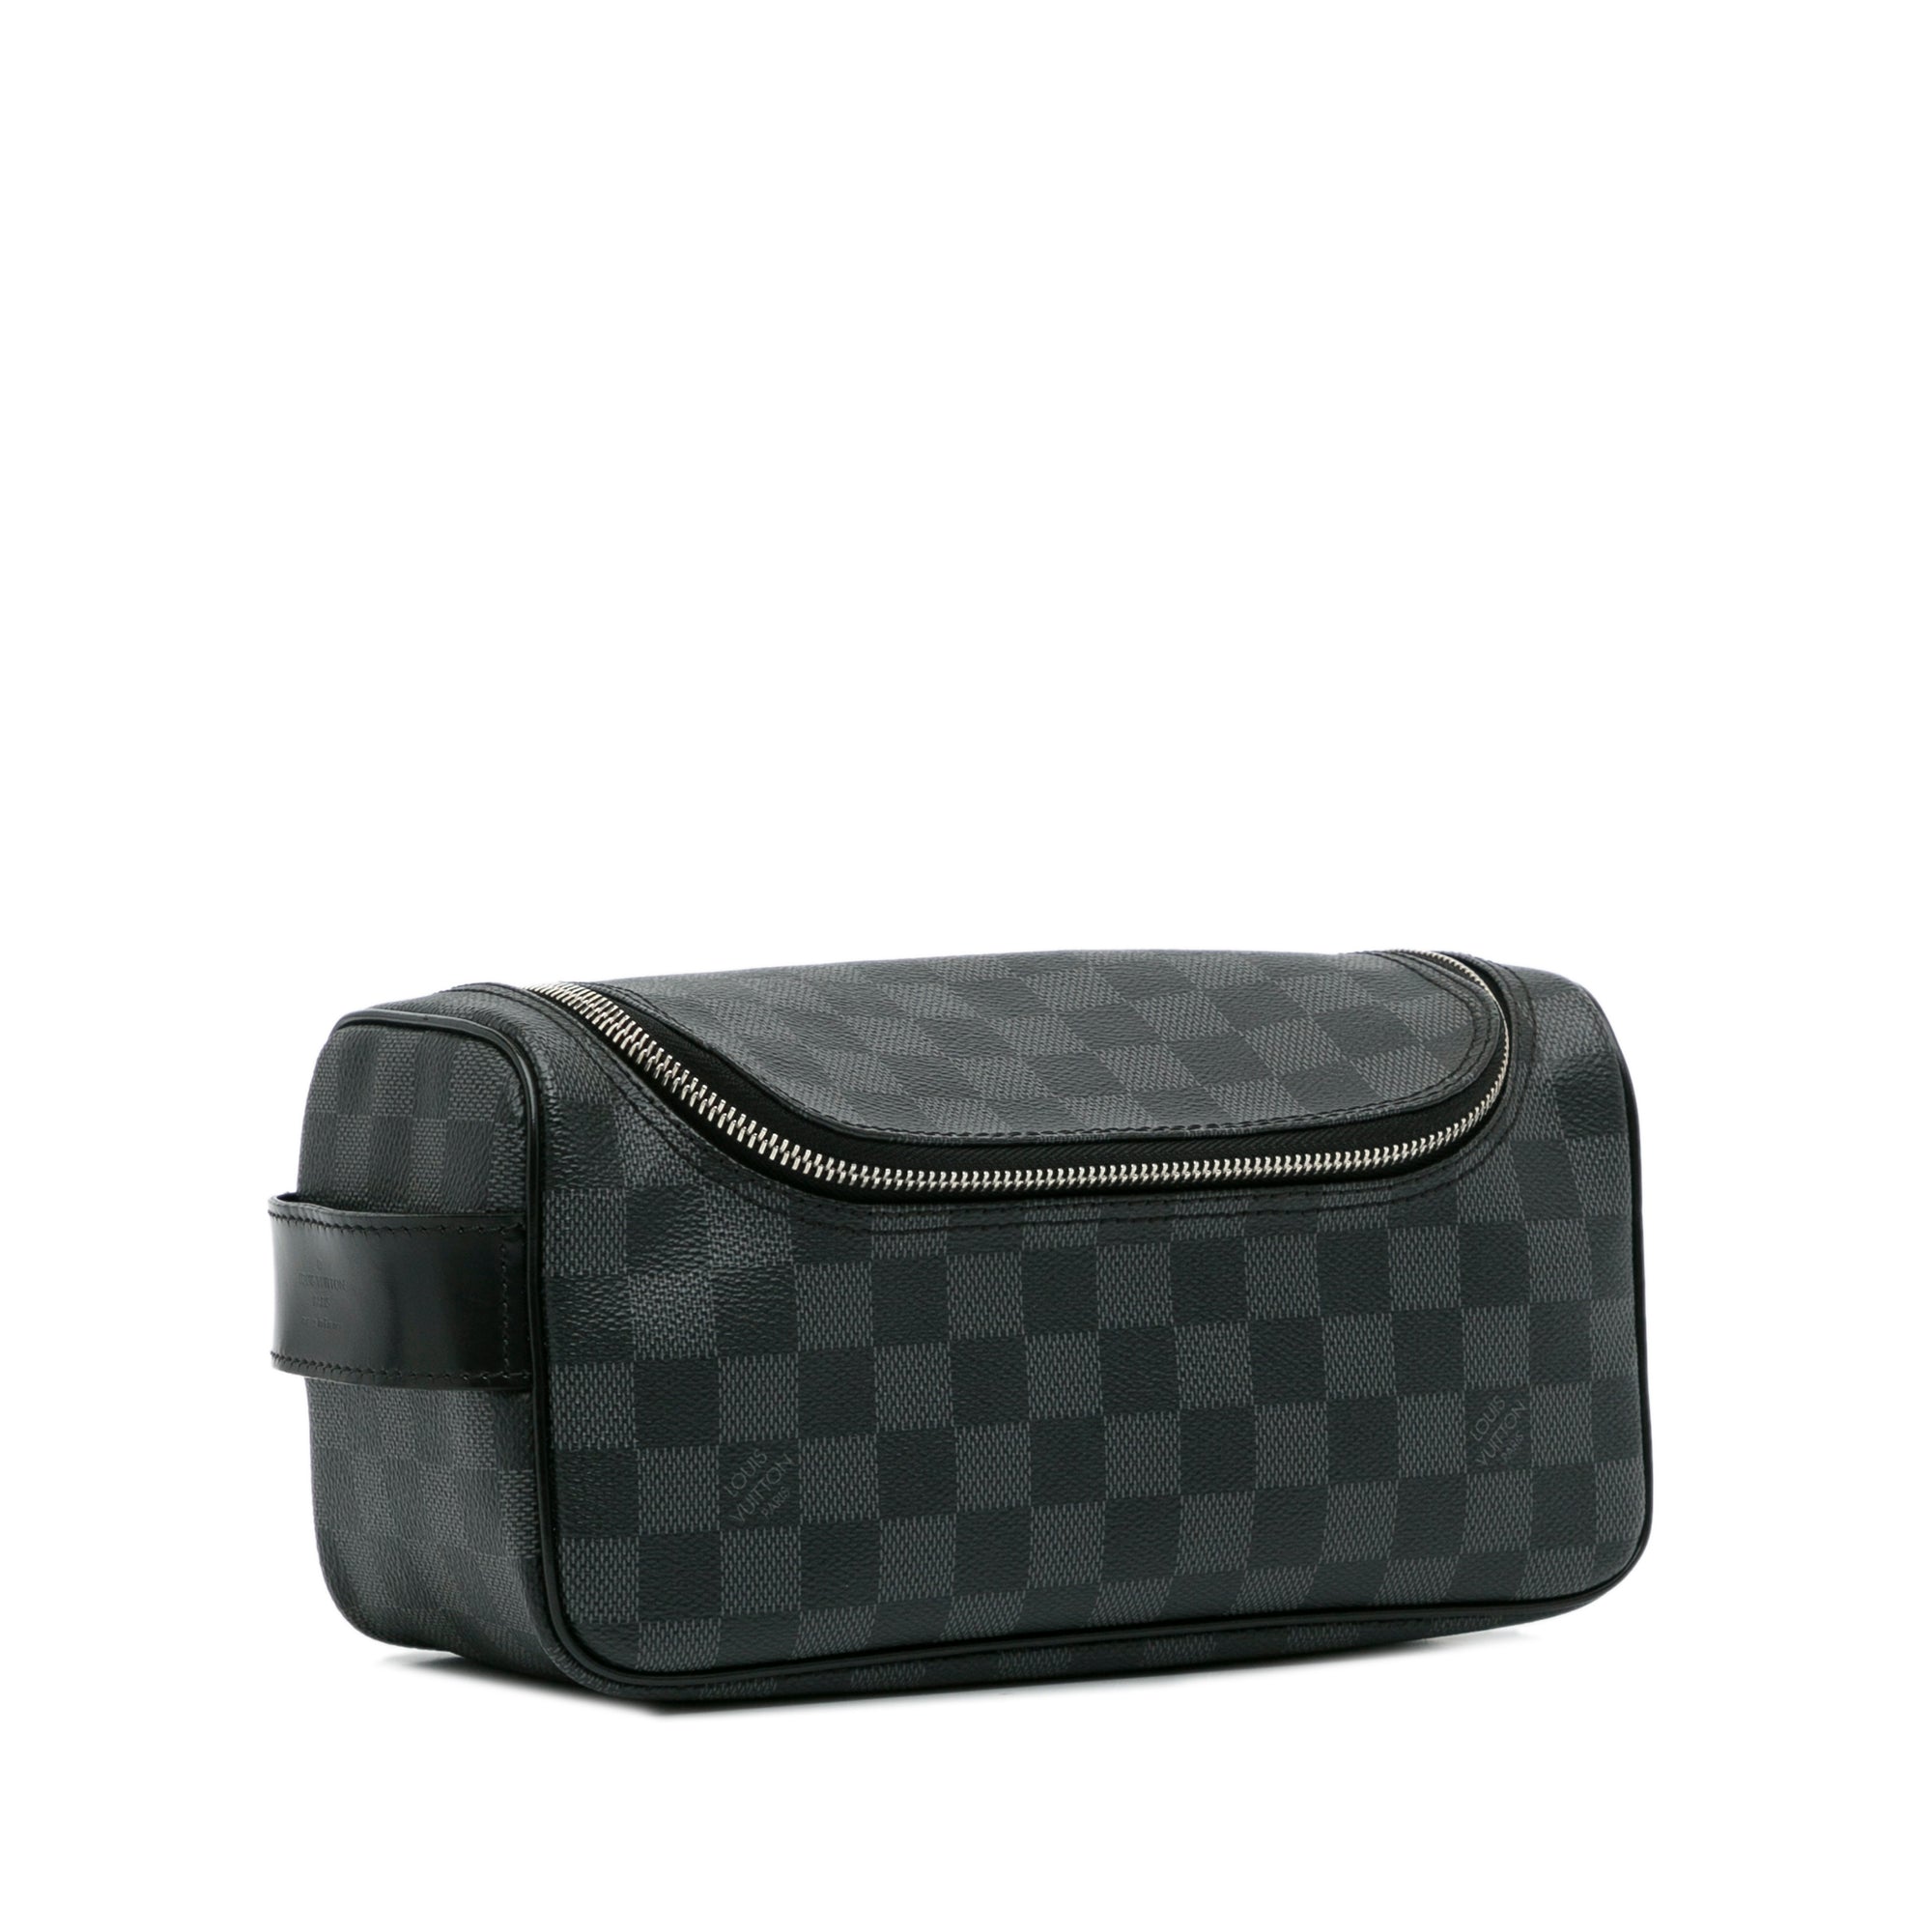 Auth Louis Vuitton Damier Graphite Toiletry Black Pouch N47625 Used F/S